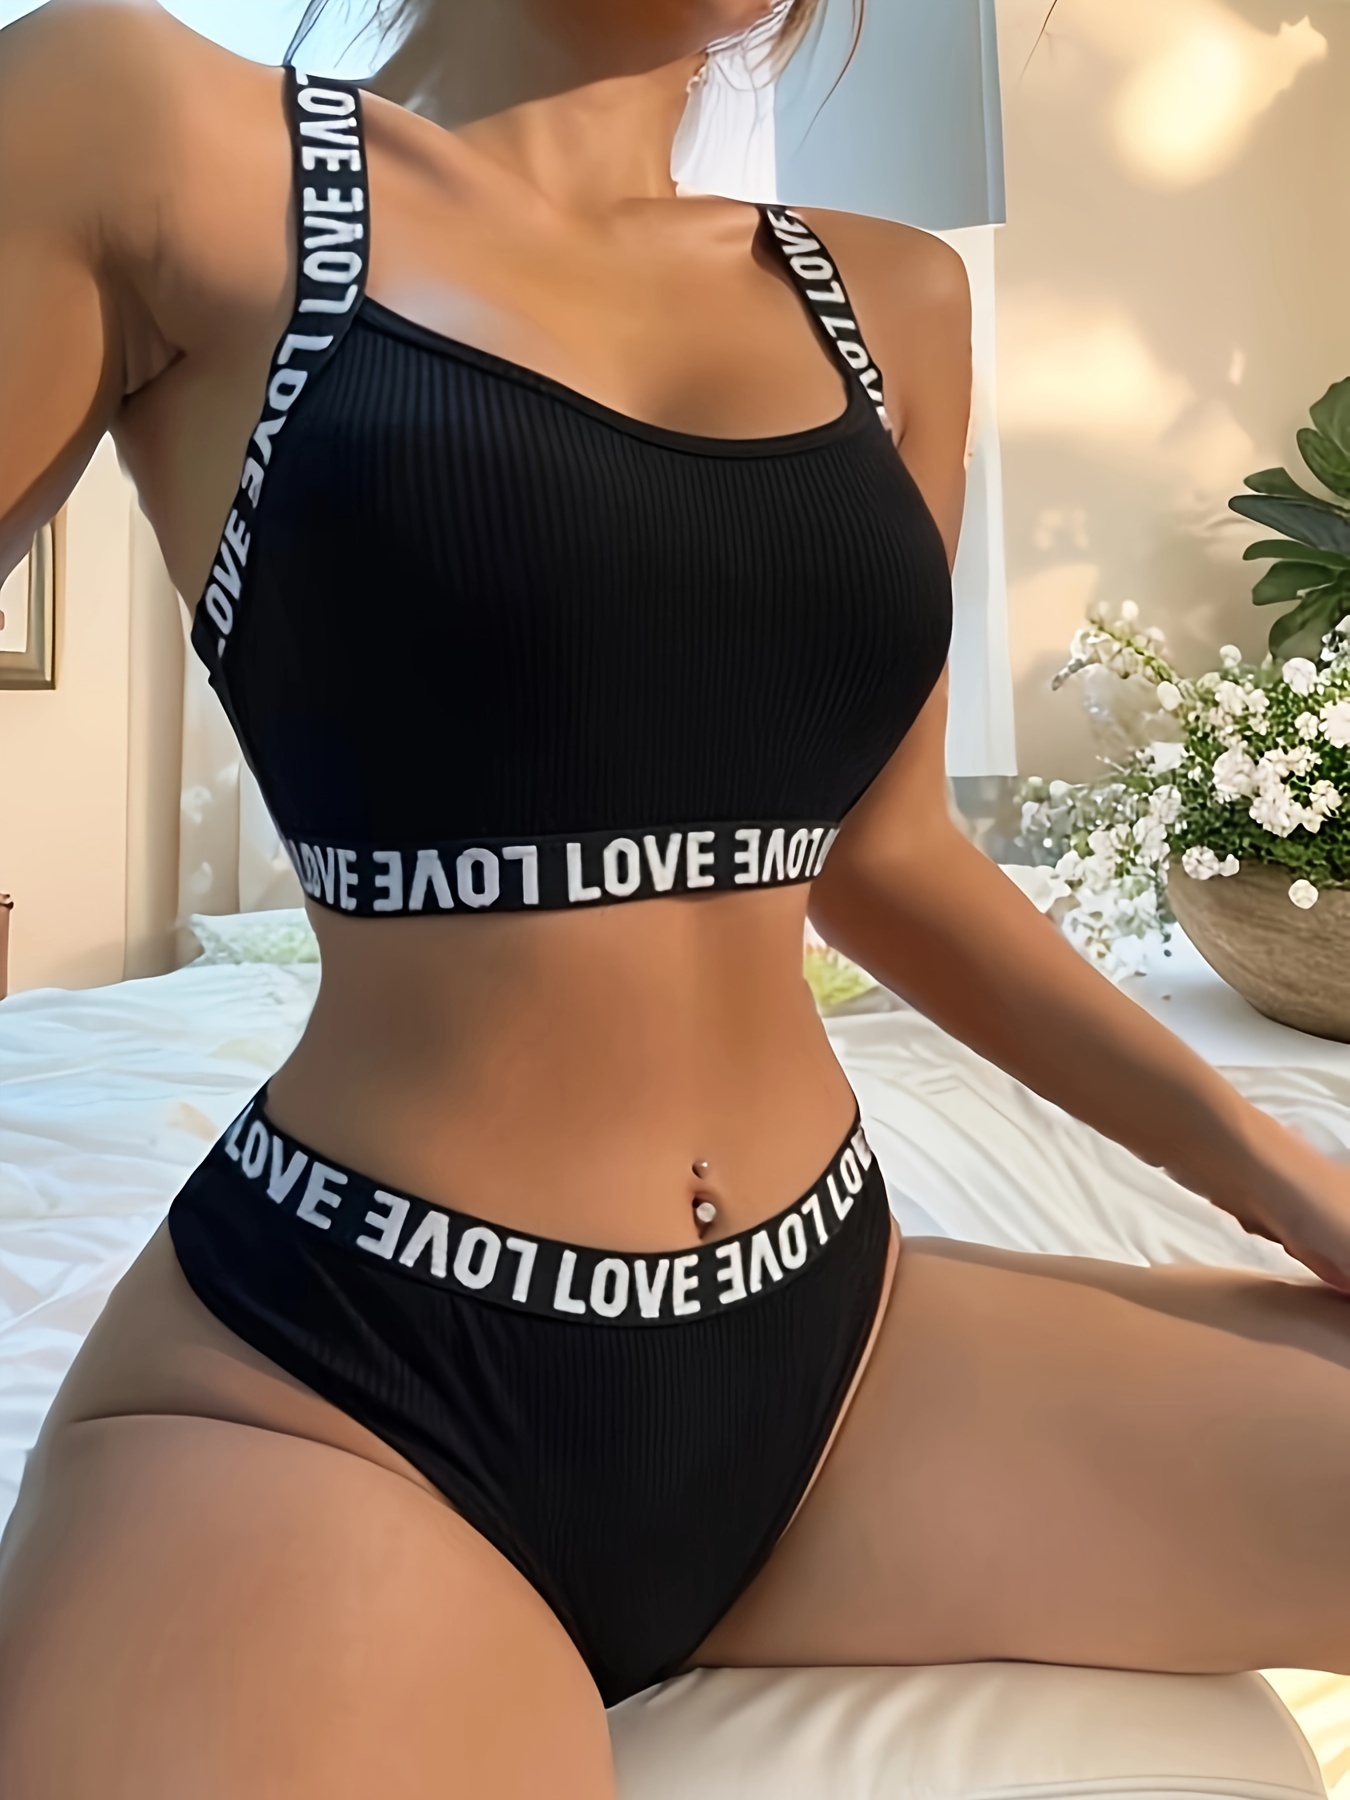 INTIMA Letters Printed One-Piece Glossy Push Up Bra And Panties For Women  Seamless No Wire Underwear Lingerie Set